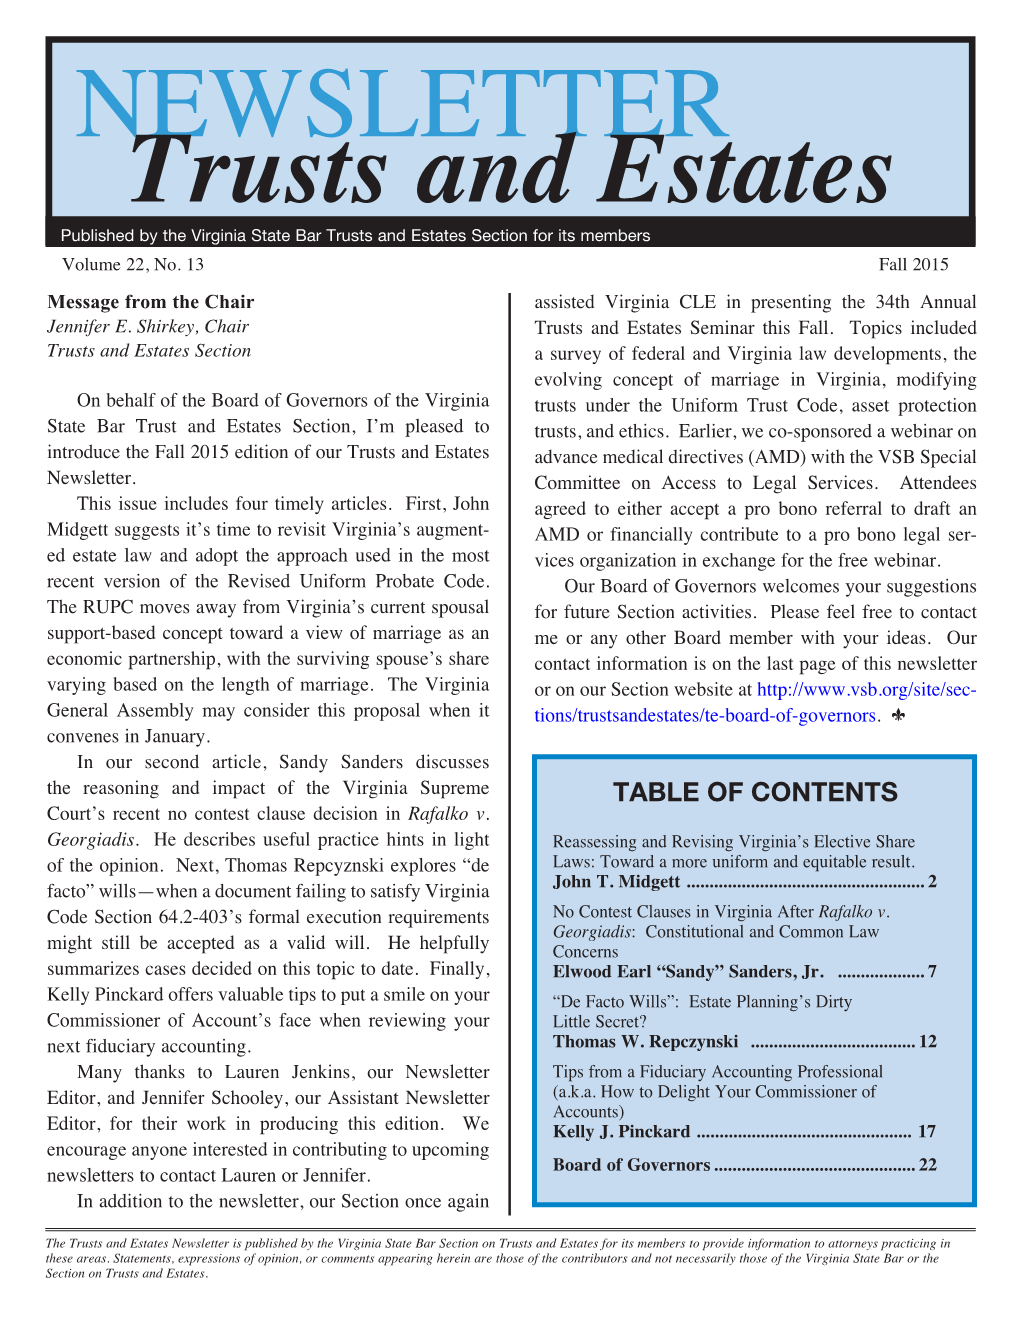 Trusts and Estates Newsletter